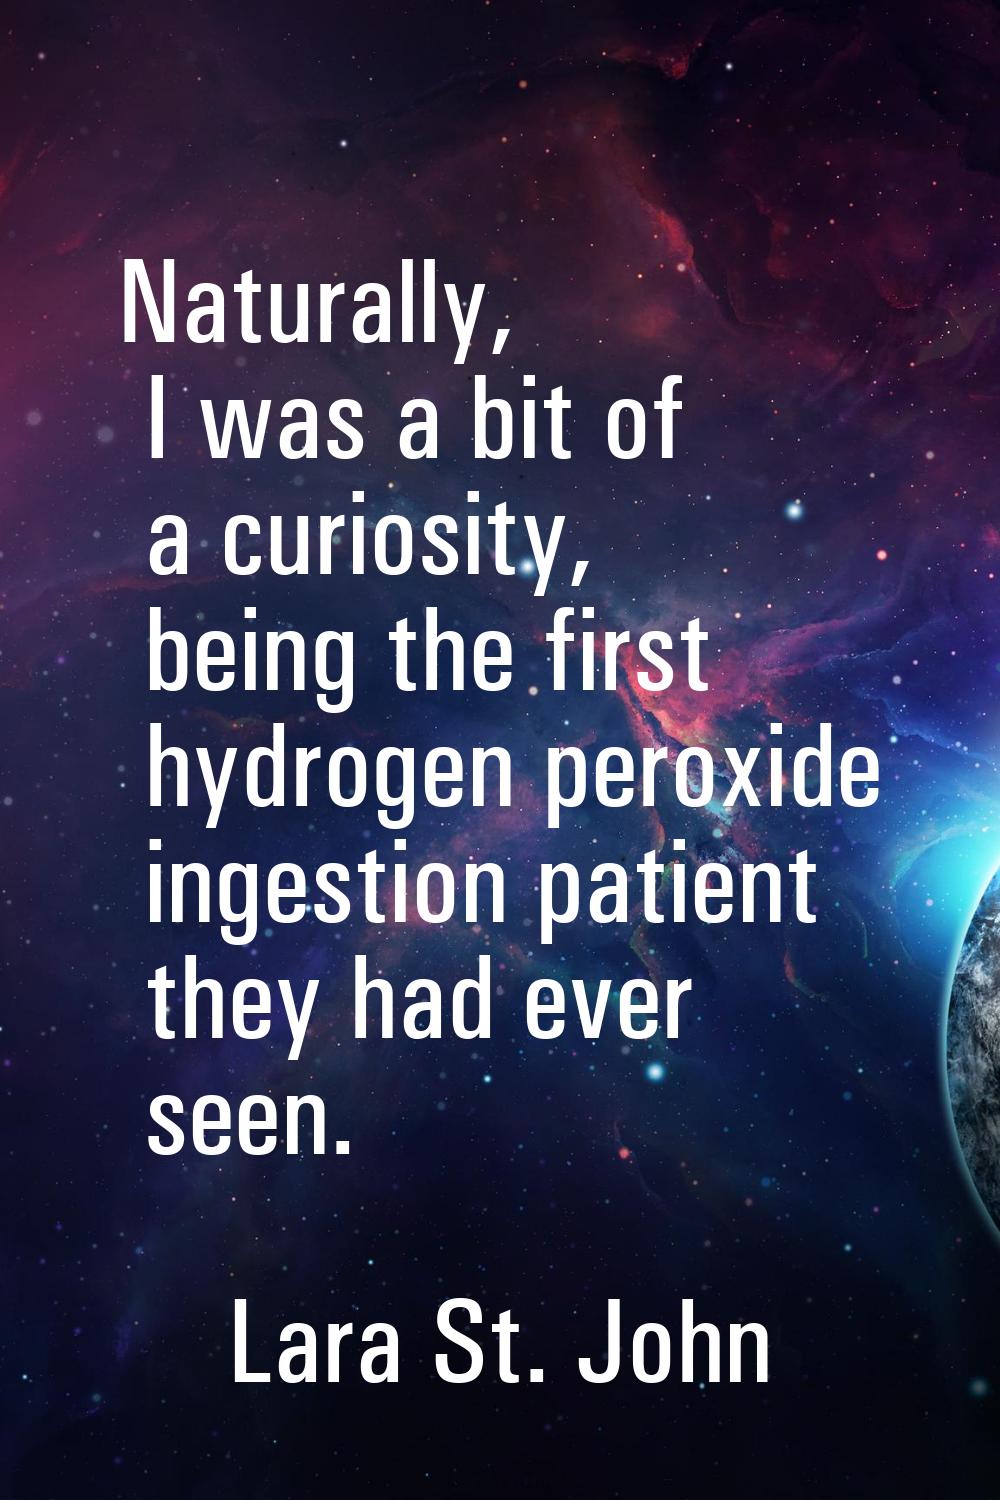 Naturally, I was a bit of a curiosity, being the first hydrogen peroxide ingestion patient they had